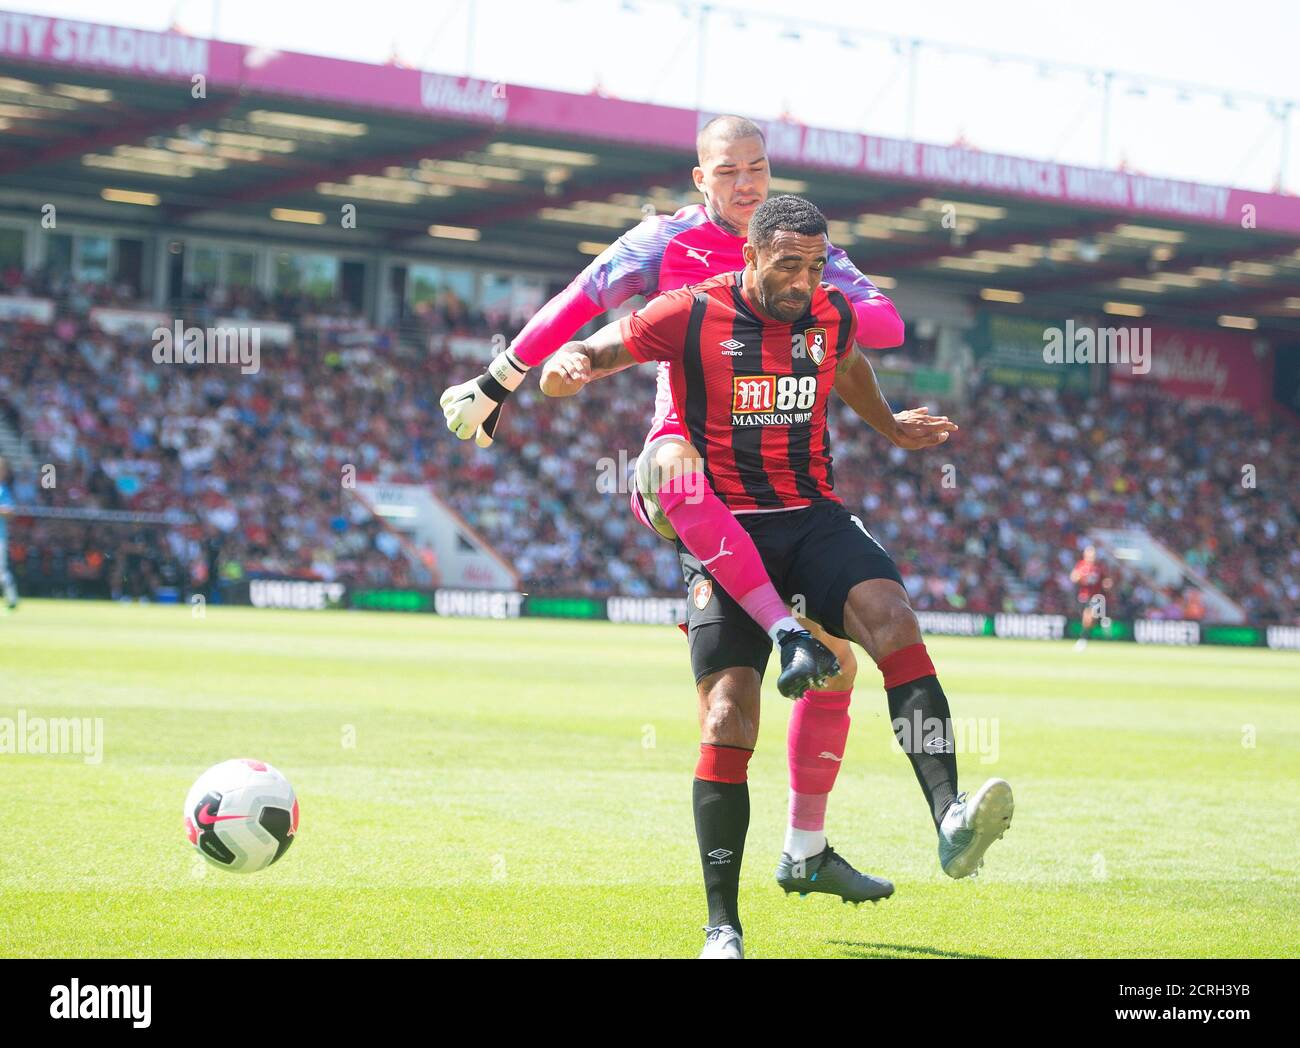 Manchester City's Goalkeeper Ederson challenges Bournemouth's Callum Wilson. PICTURE CREDIT : © MARK PAIN / ALAMY STOCK PHOTO Stock Photo